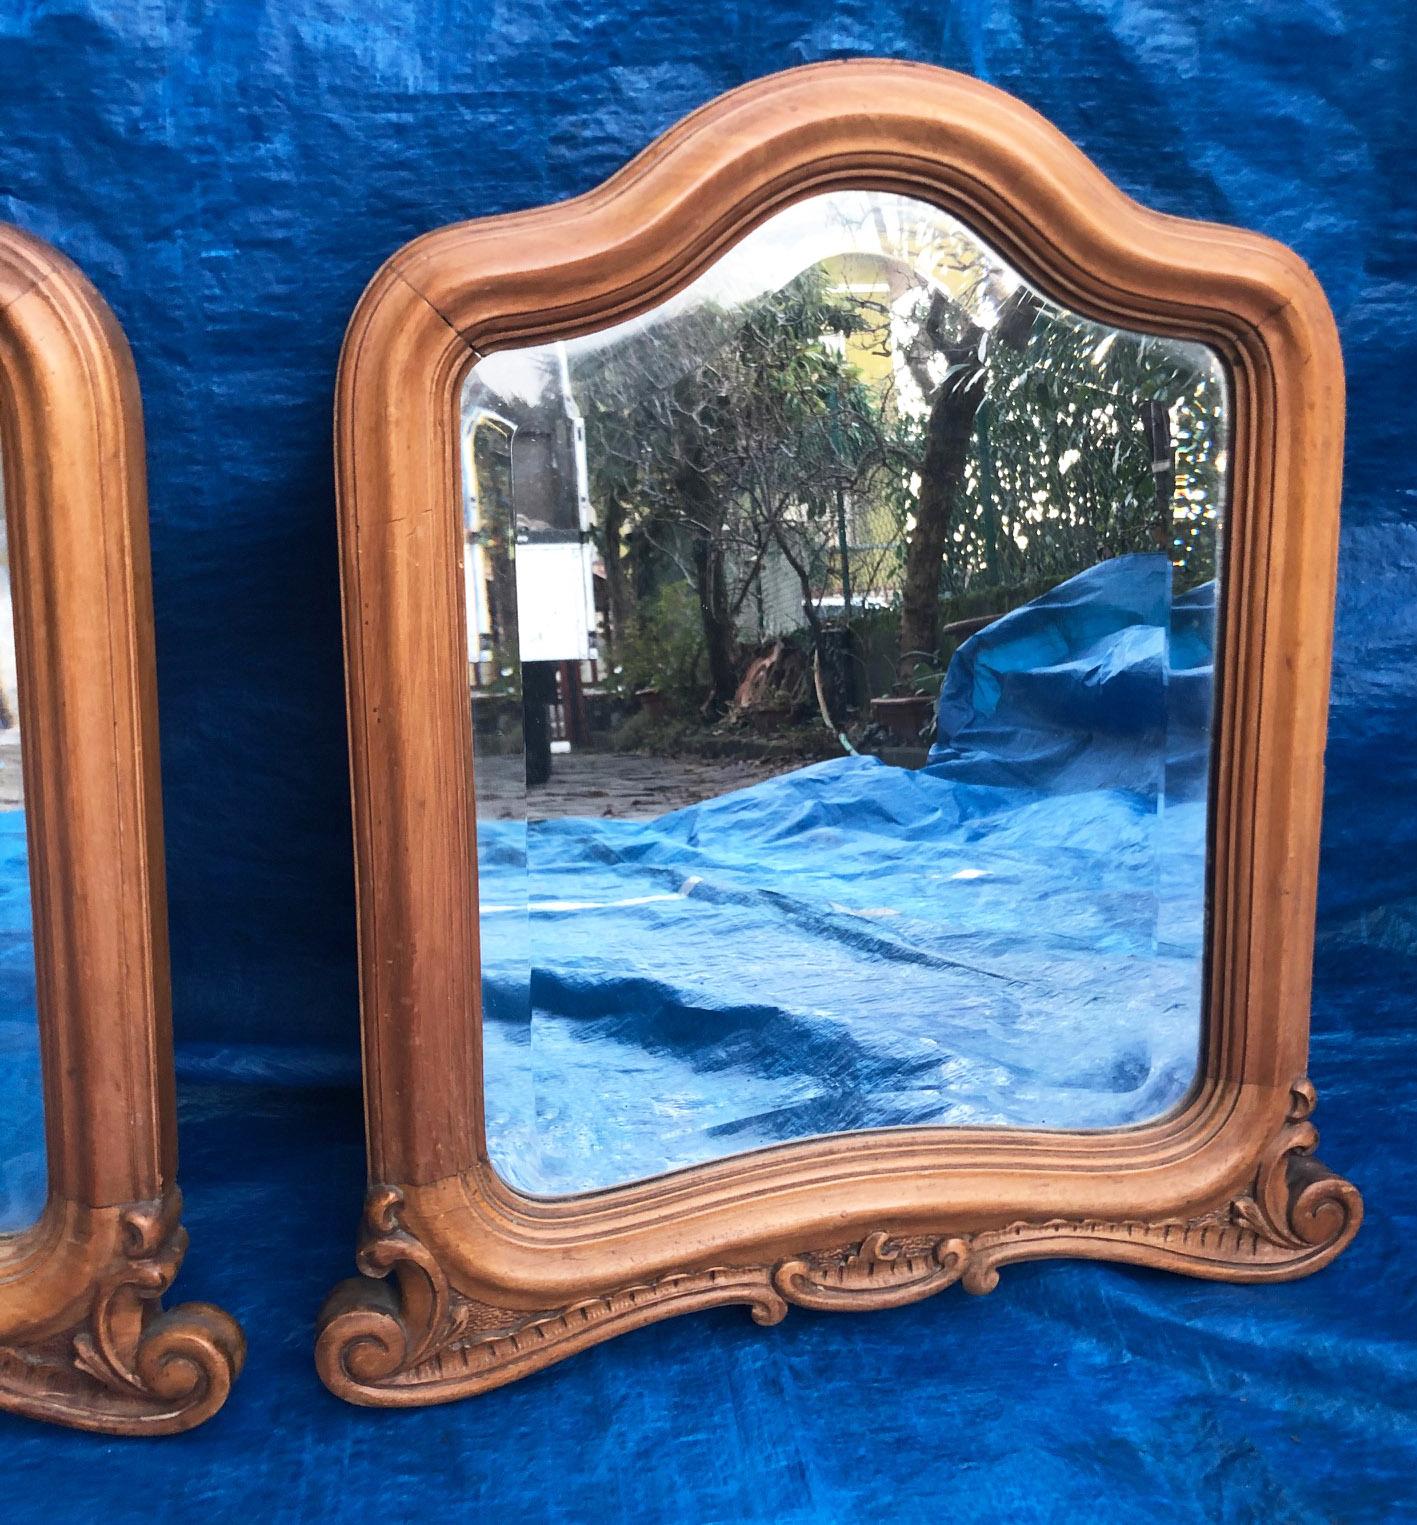 Pair of mirrors, original antique, shaped, excellent shape.
Frame in walnut.
They will be delivered in a specific wooden case for export, packed in bubble wrap.
Comes from an old country house in the Pisa area of Tuscany.
The paint is original in